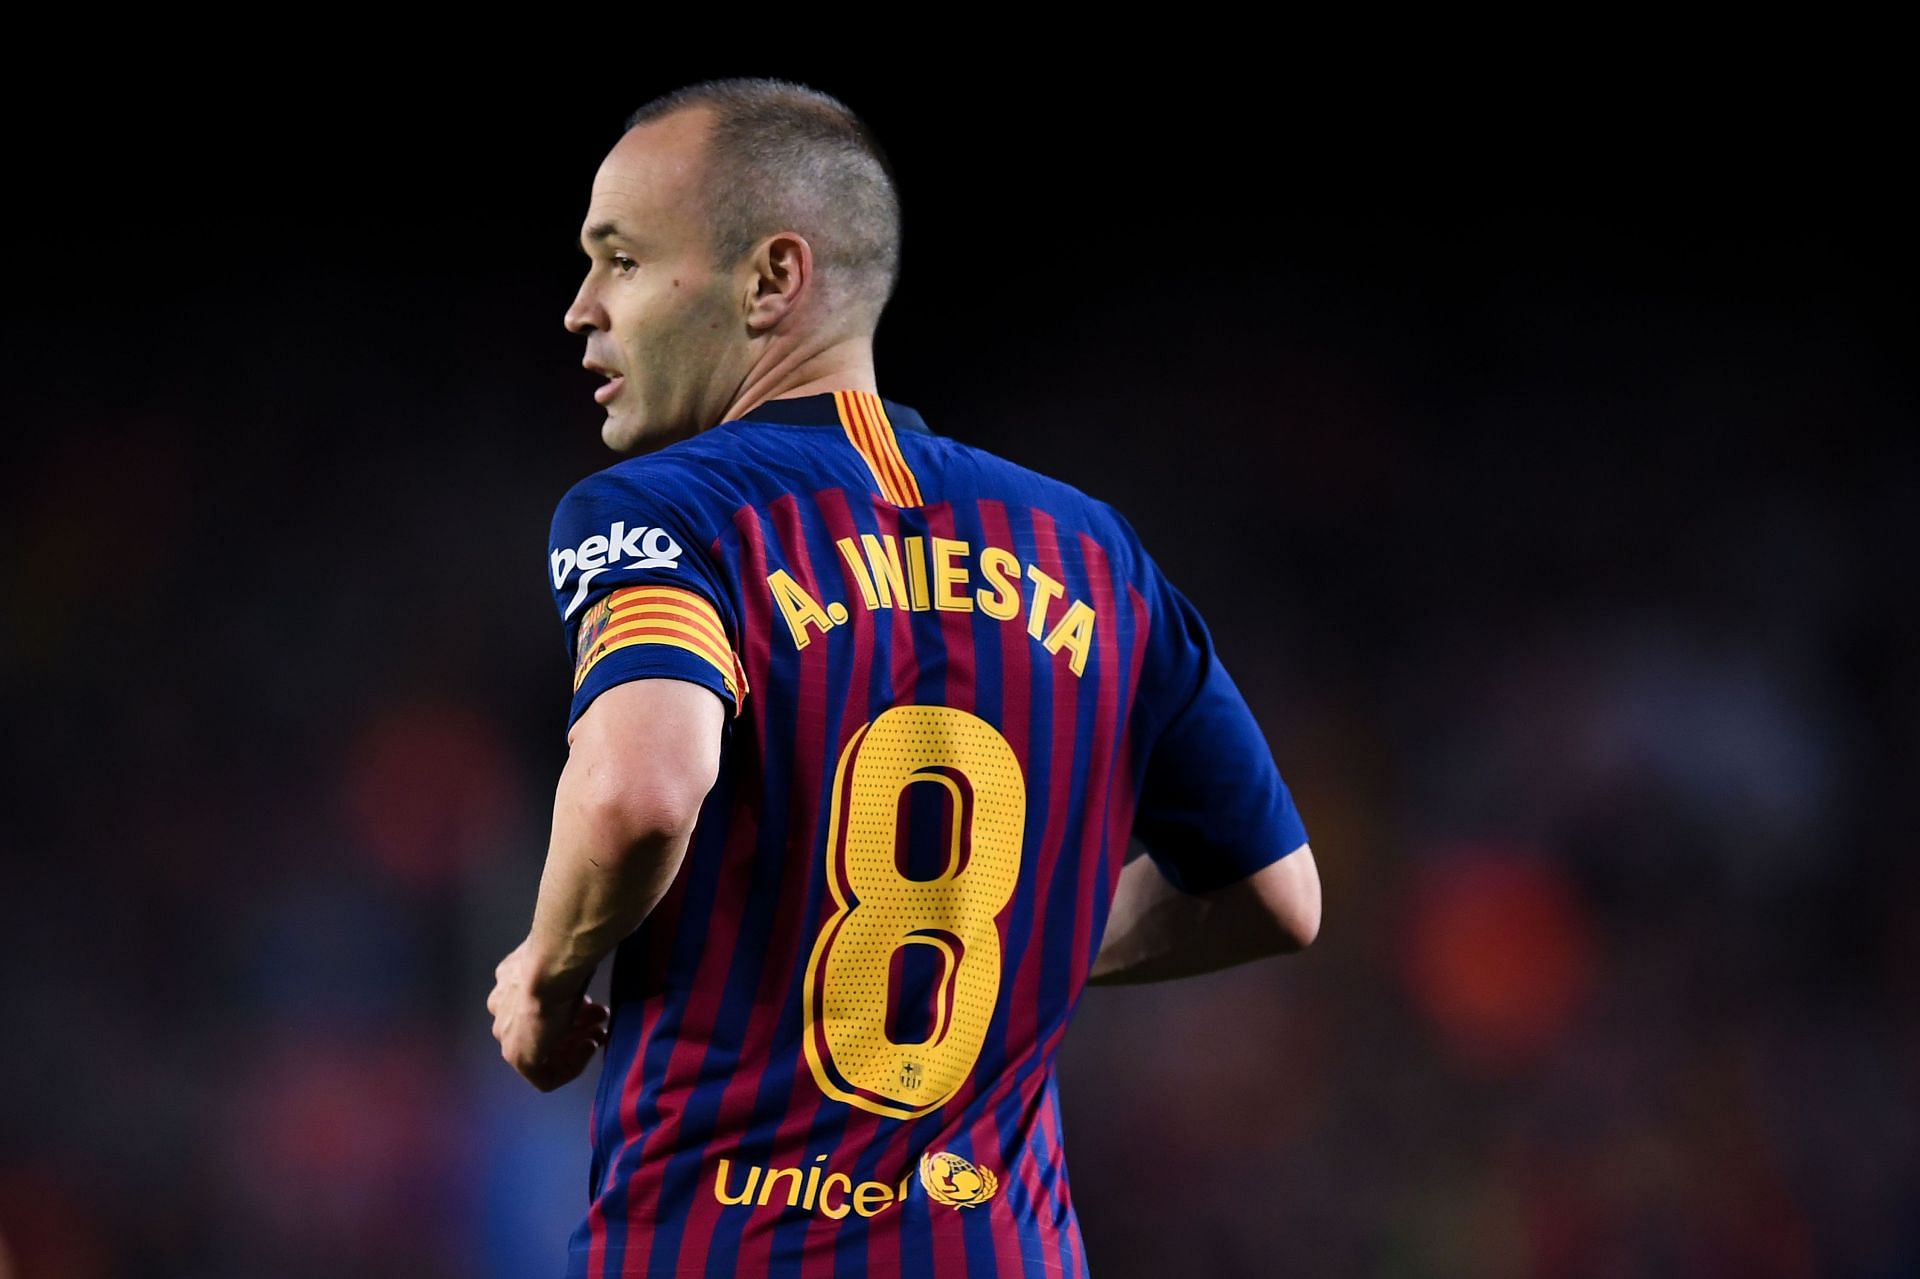 Iniesta in action for Barcelona in his iconic #8 jersey, as captain.